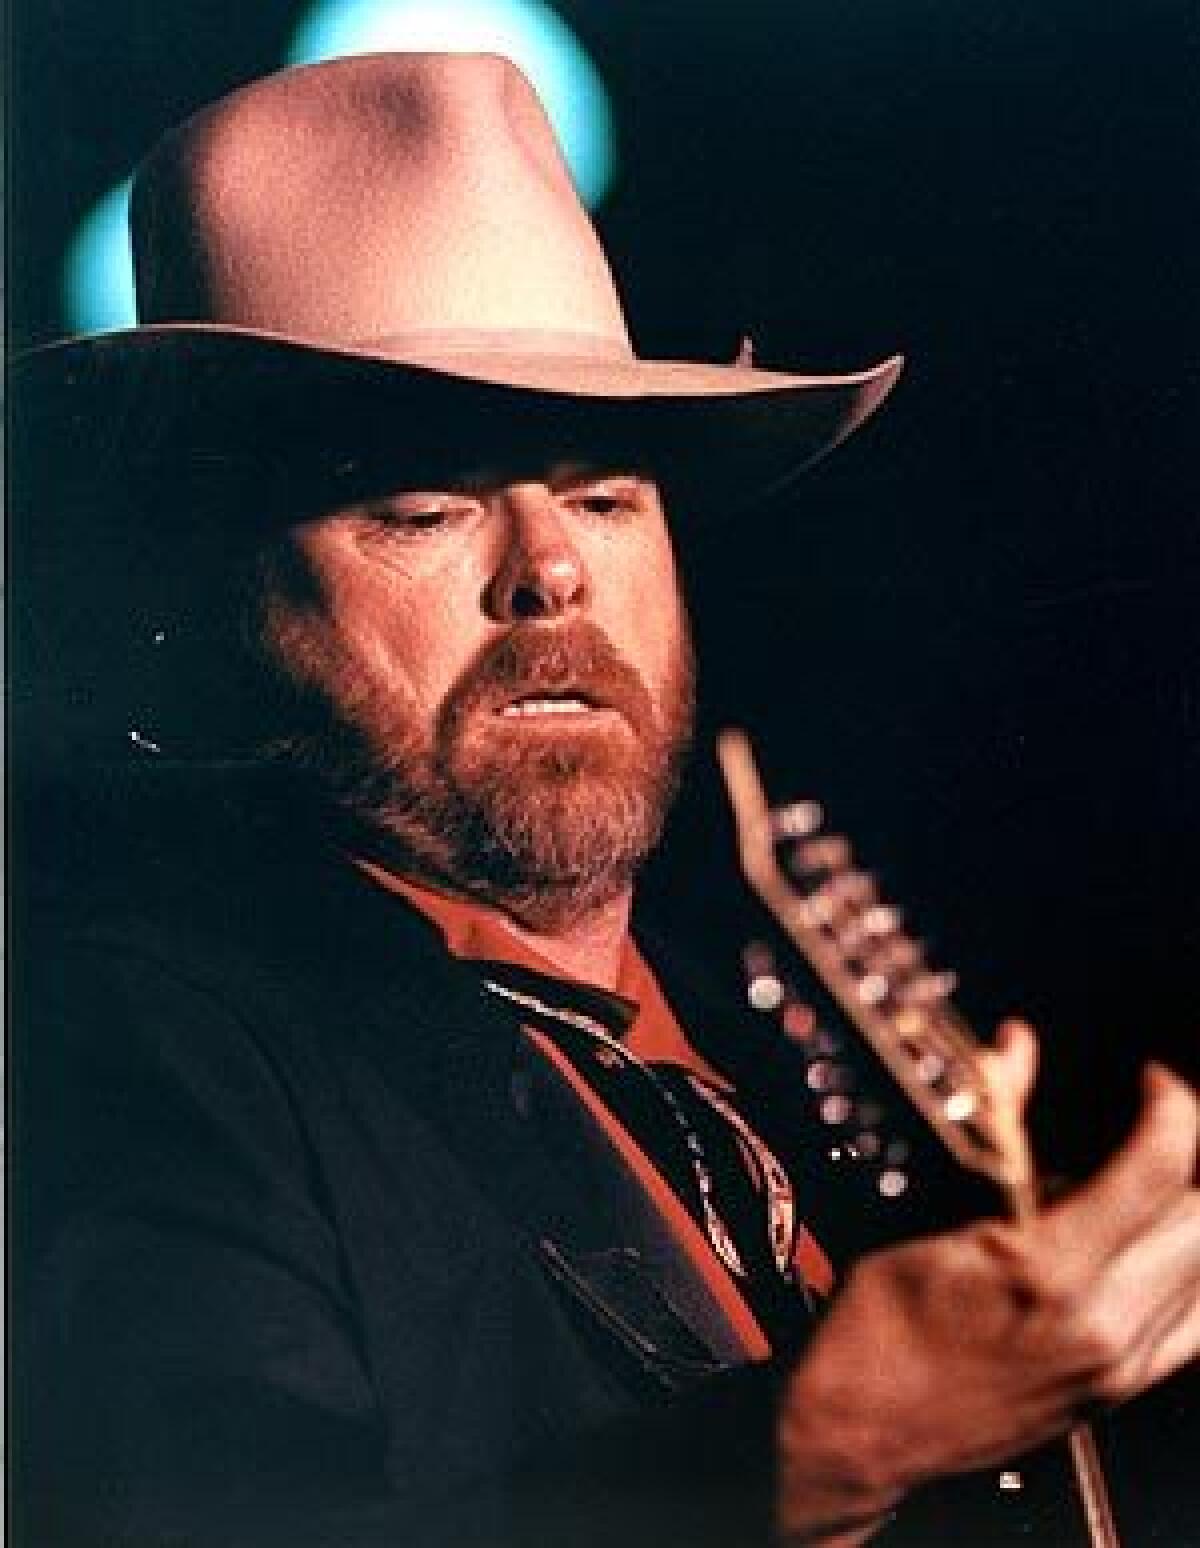 Dan Seals, seen here performing in January 1993 at the Crazy Horse in Santa Ana, died of complications from cancer. He was 61.